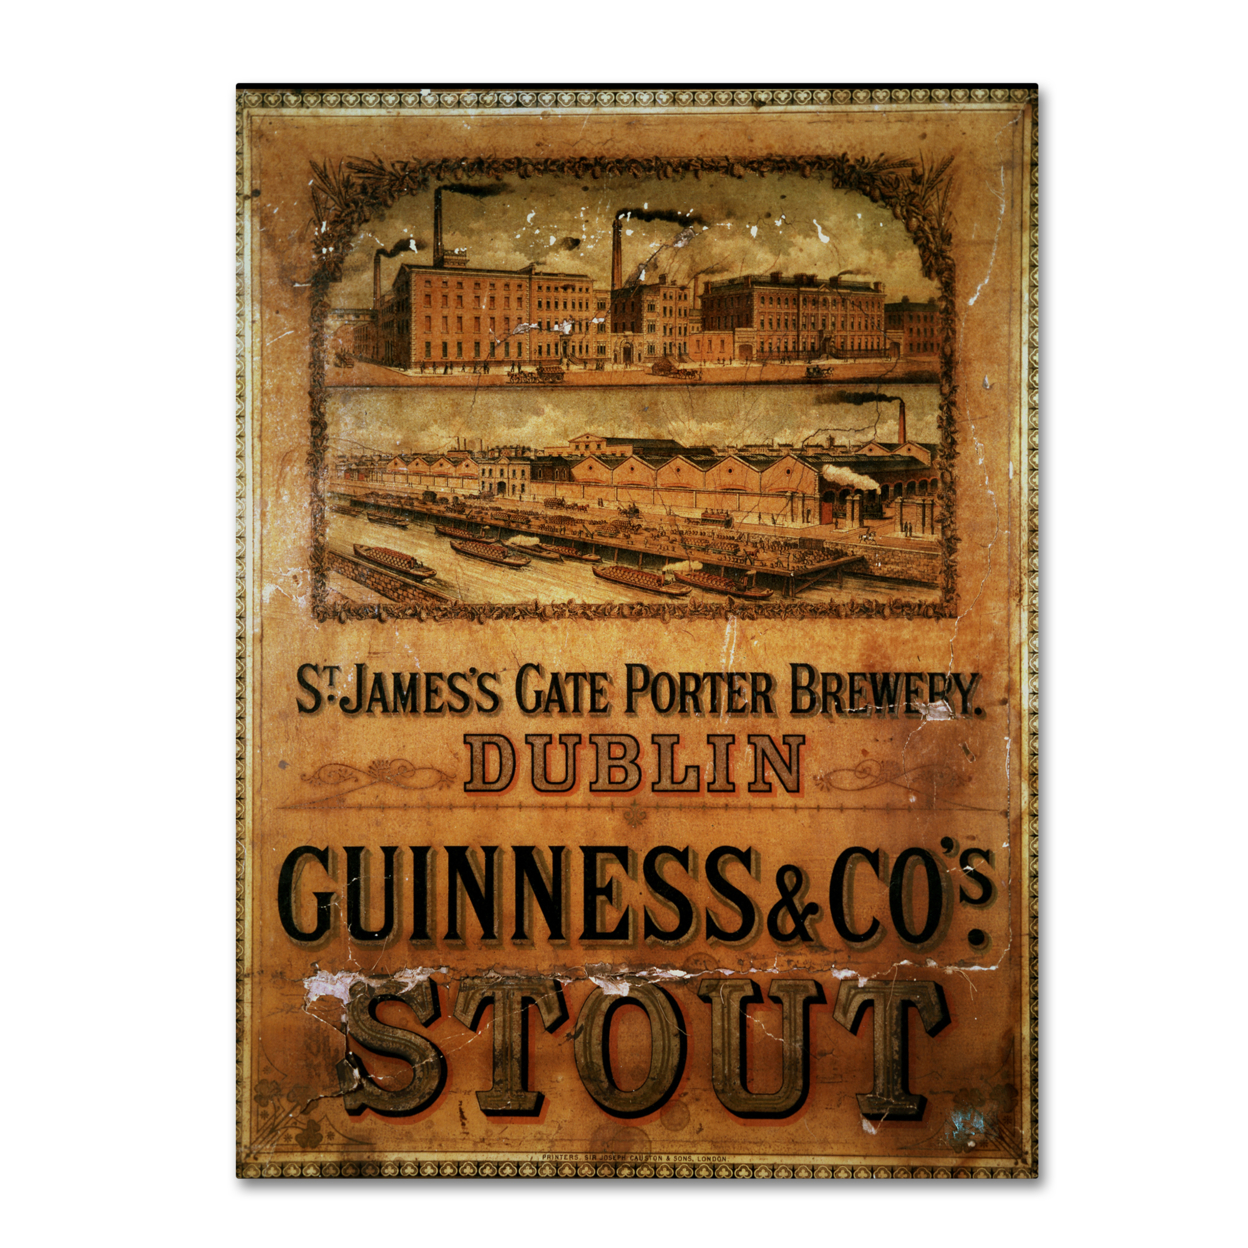 Guinness Brewery 'St. James' Gate Porter Brewery' Canvas Wall Art 35 X 47 Inches